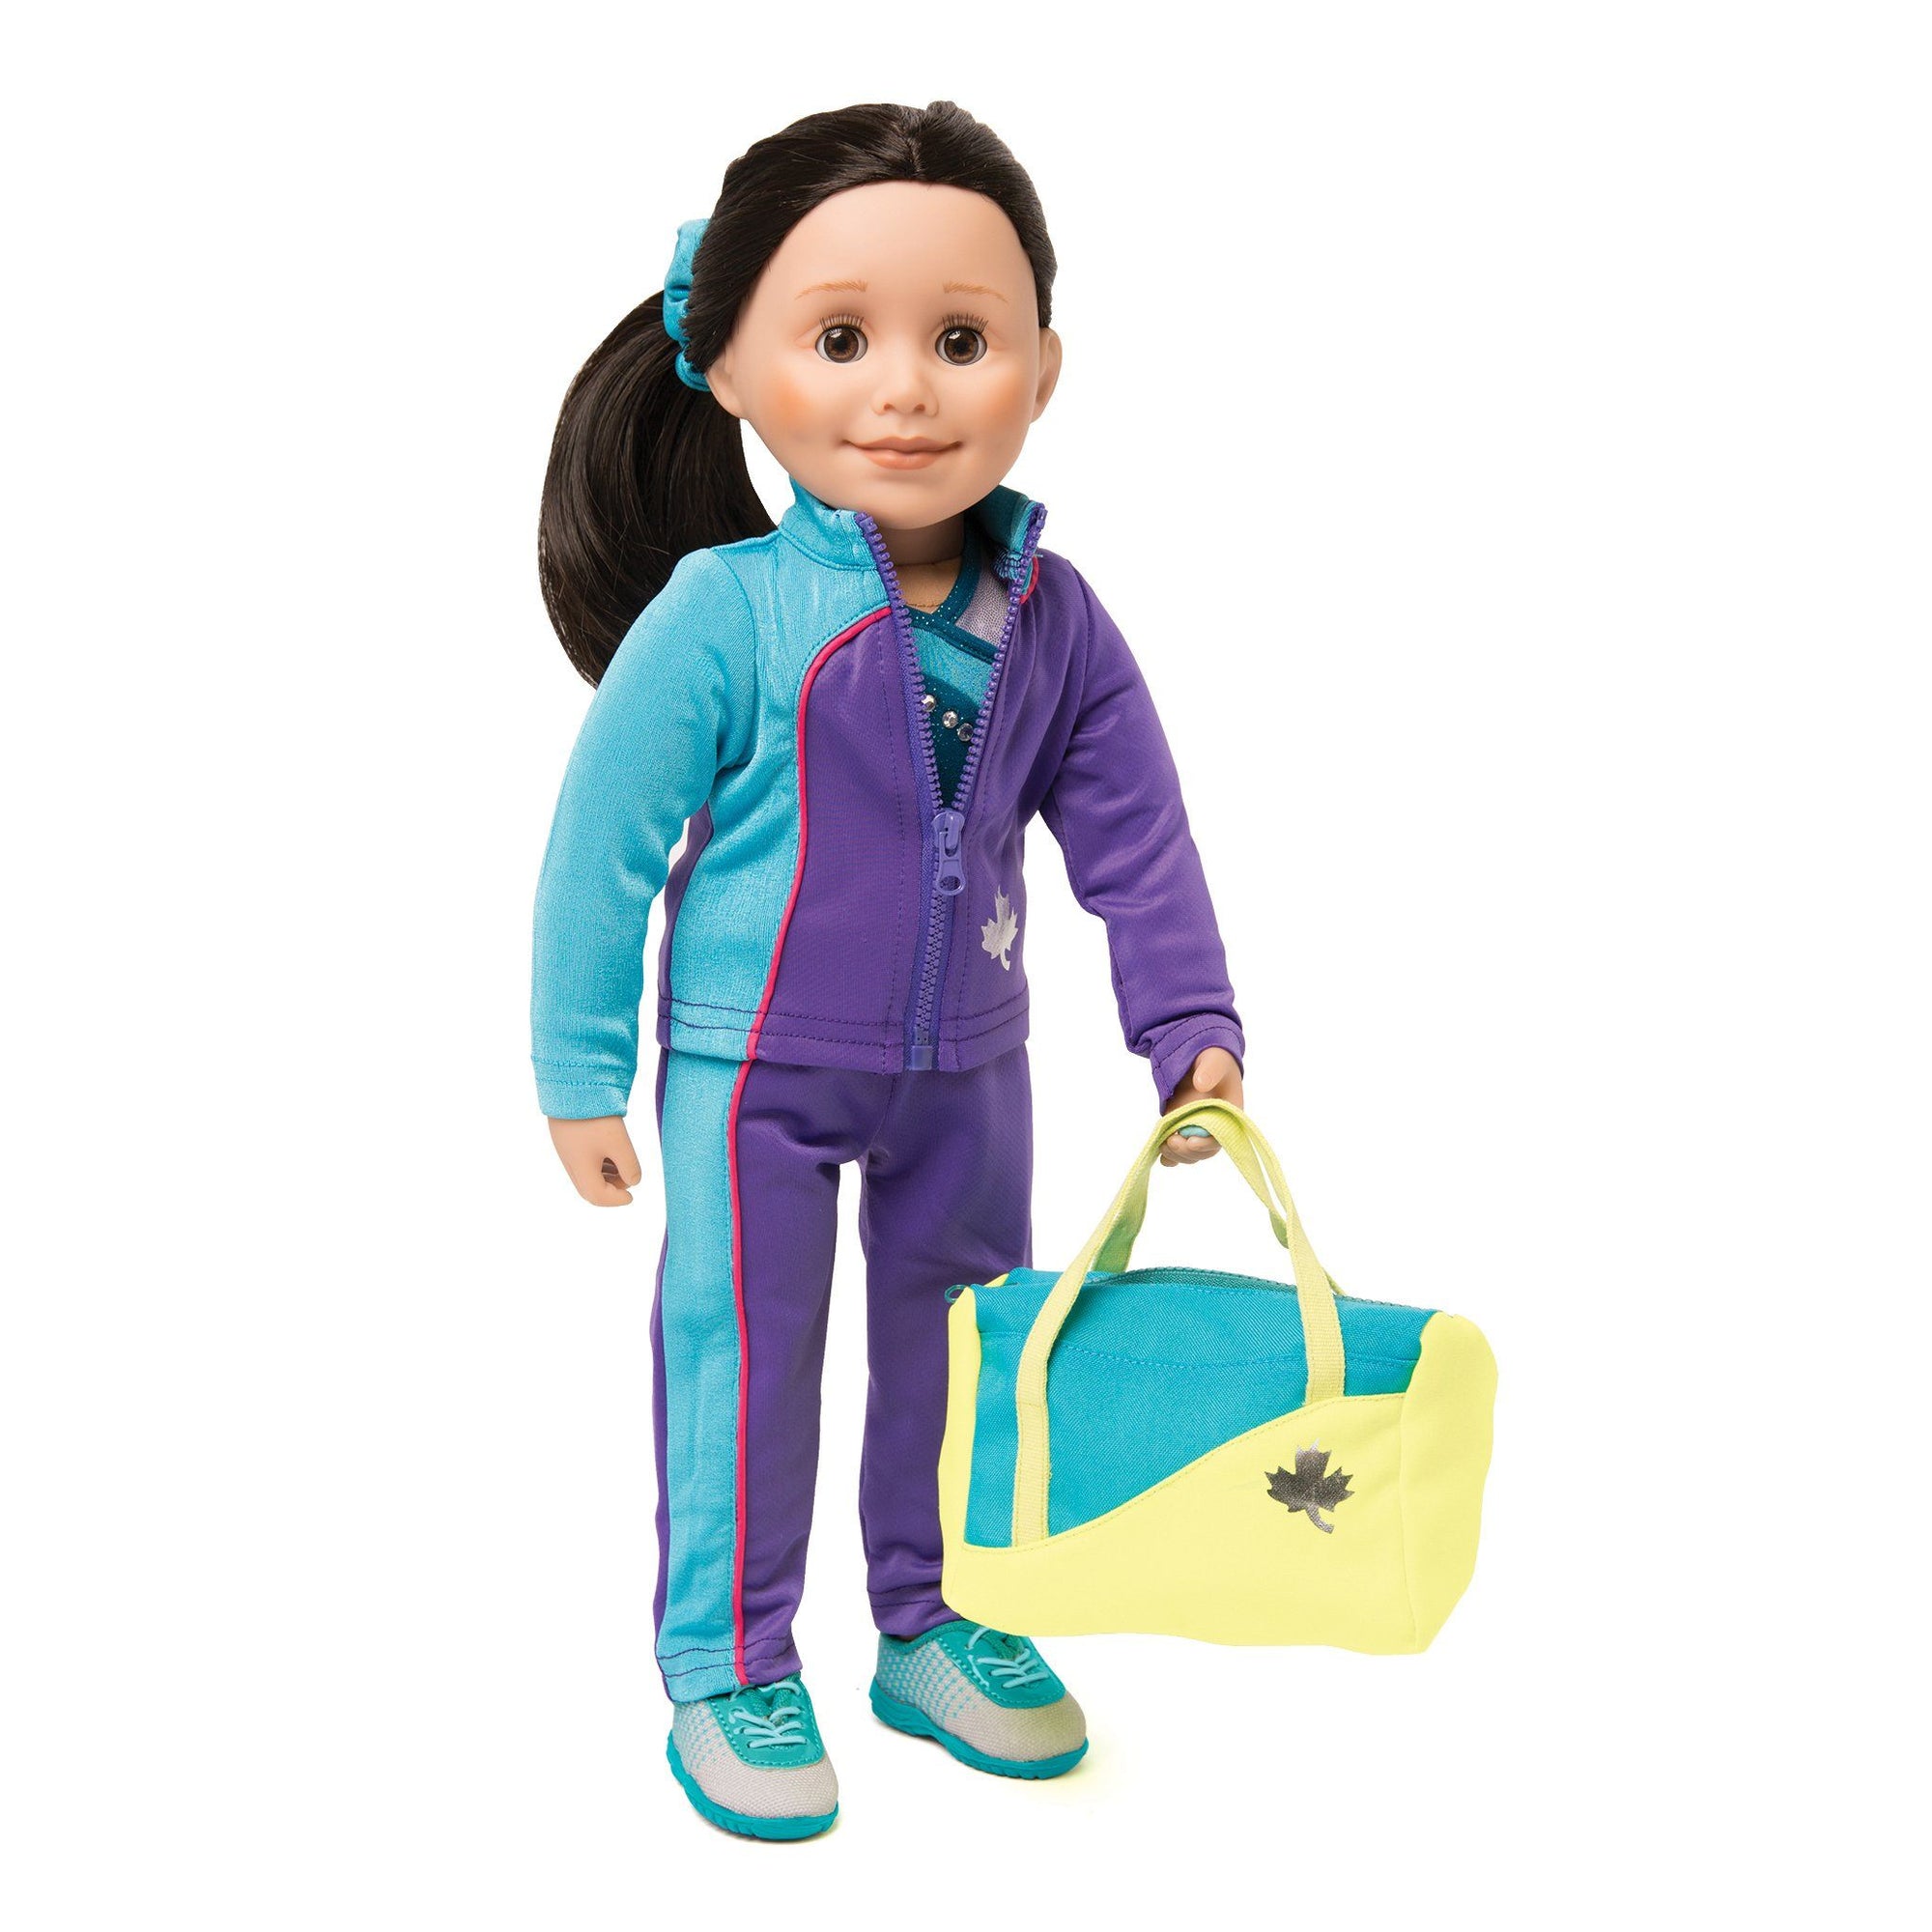 Personal Best purple and blue track pants, track jacket, with teal sparkly bodysuit, hair scrunchie and bright green and teal sports bag. Fits all 18 inch dolls. 